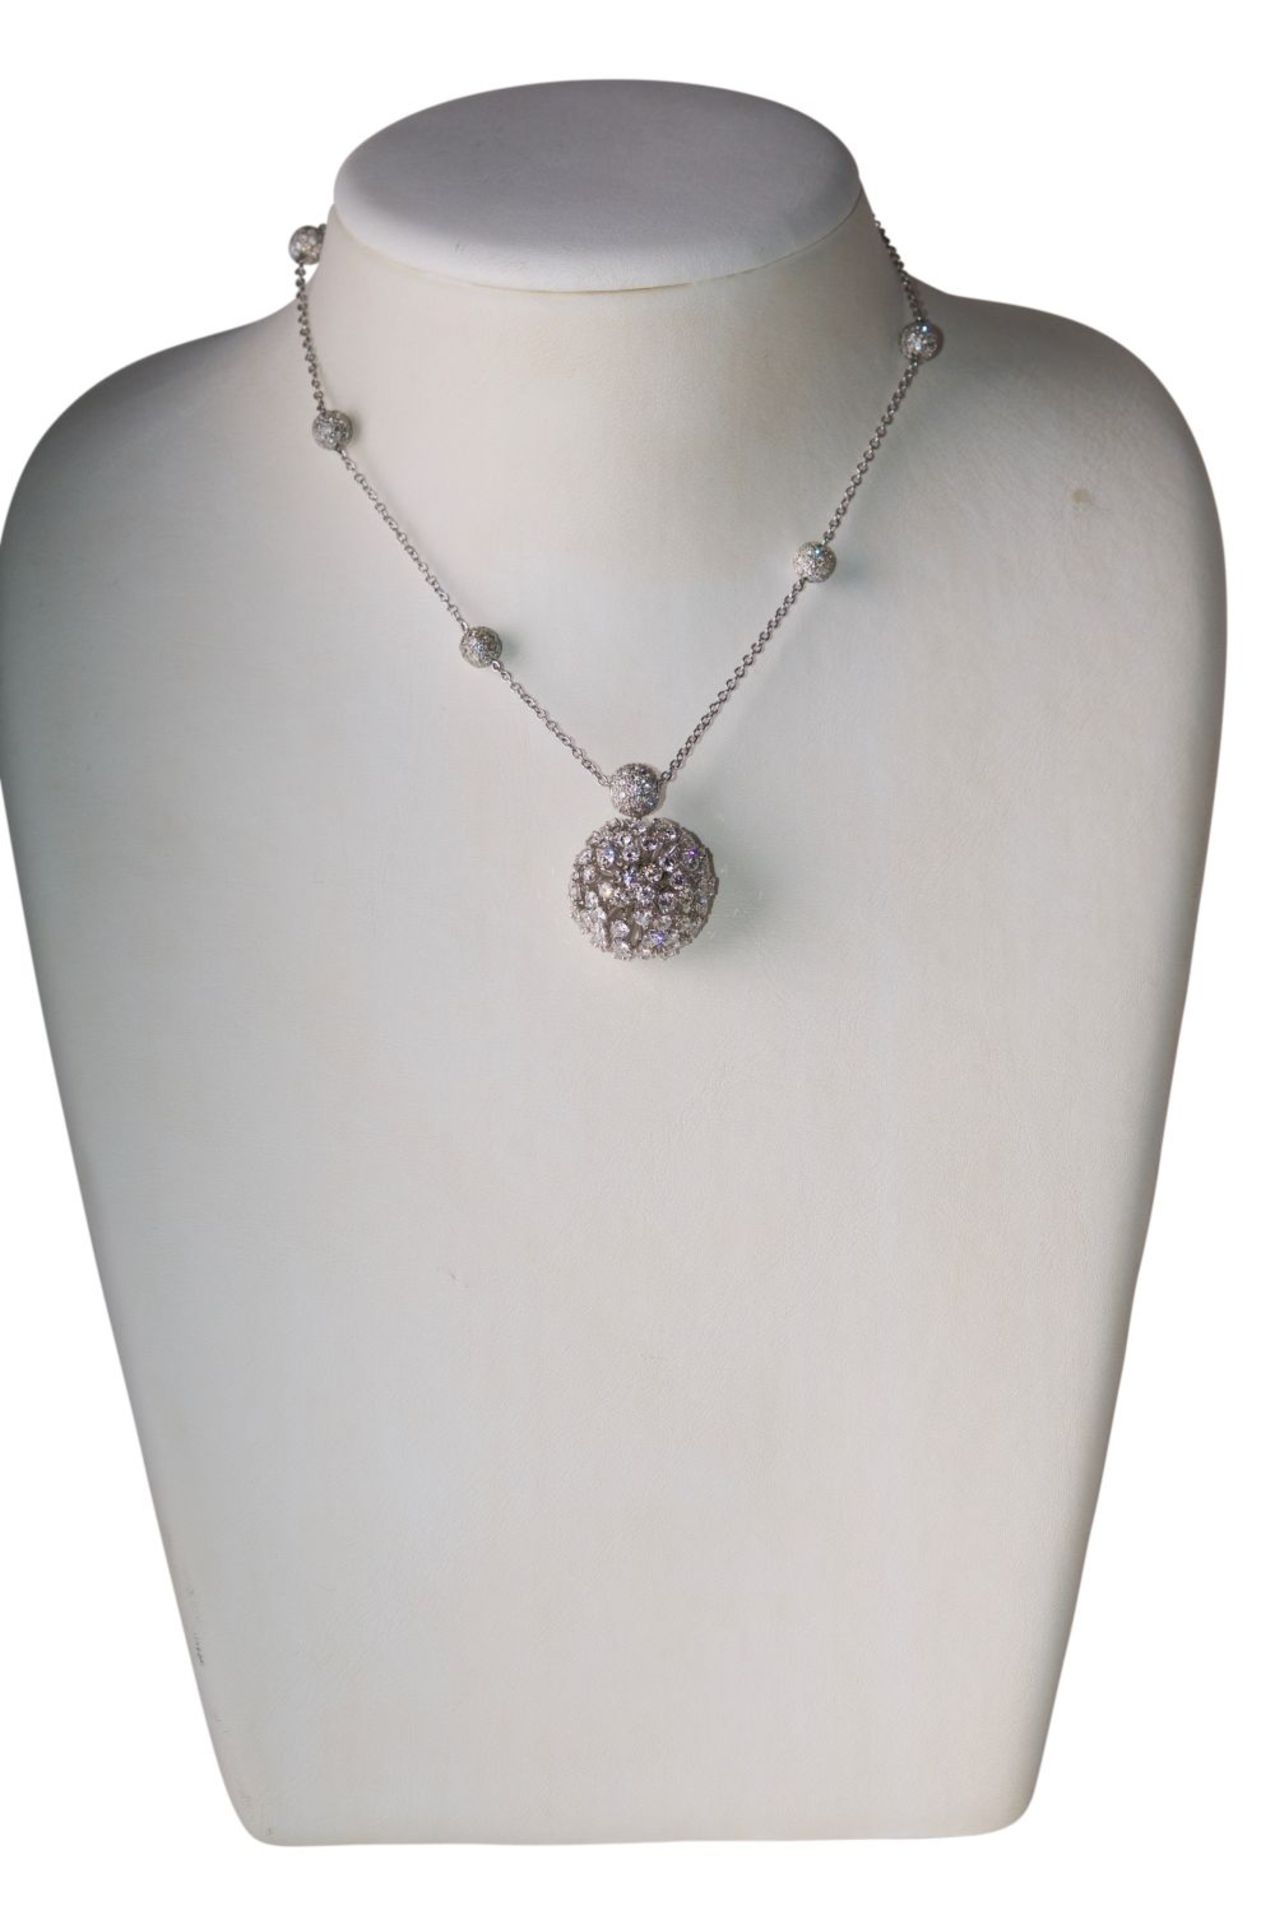 Brillant-Necklace18Kt white gold Necklace with diamonds total carat weight approx.7ct, total